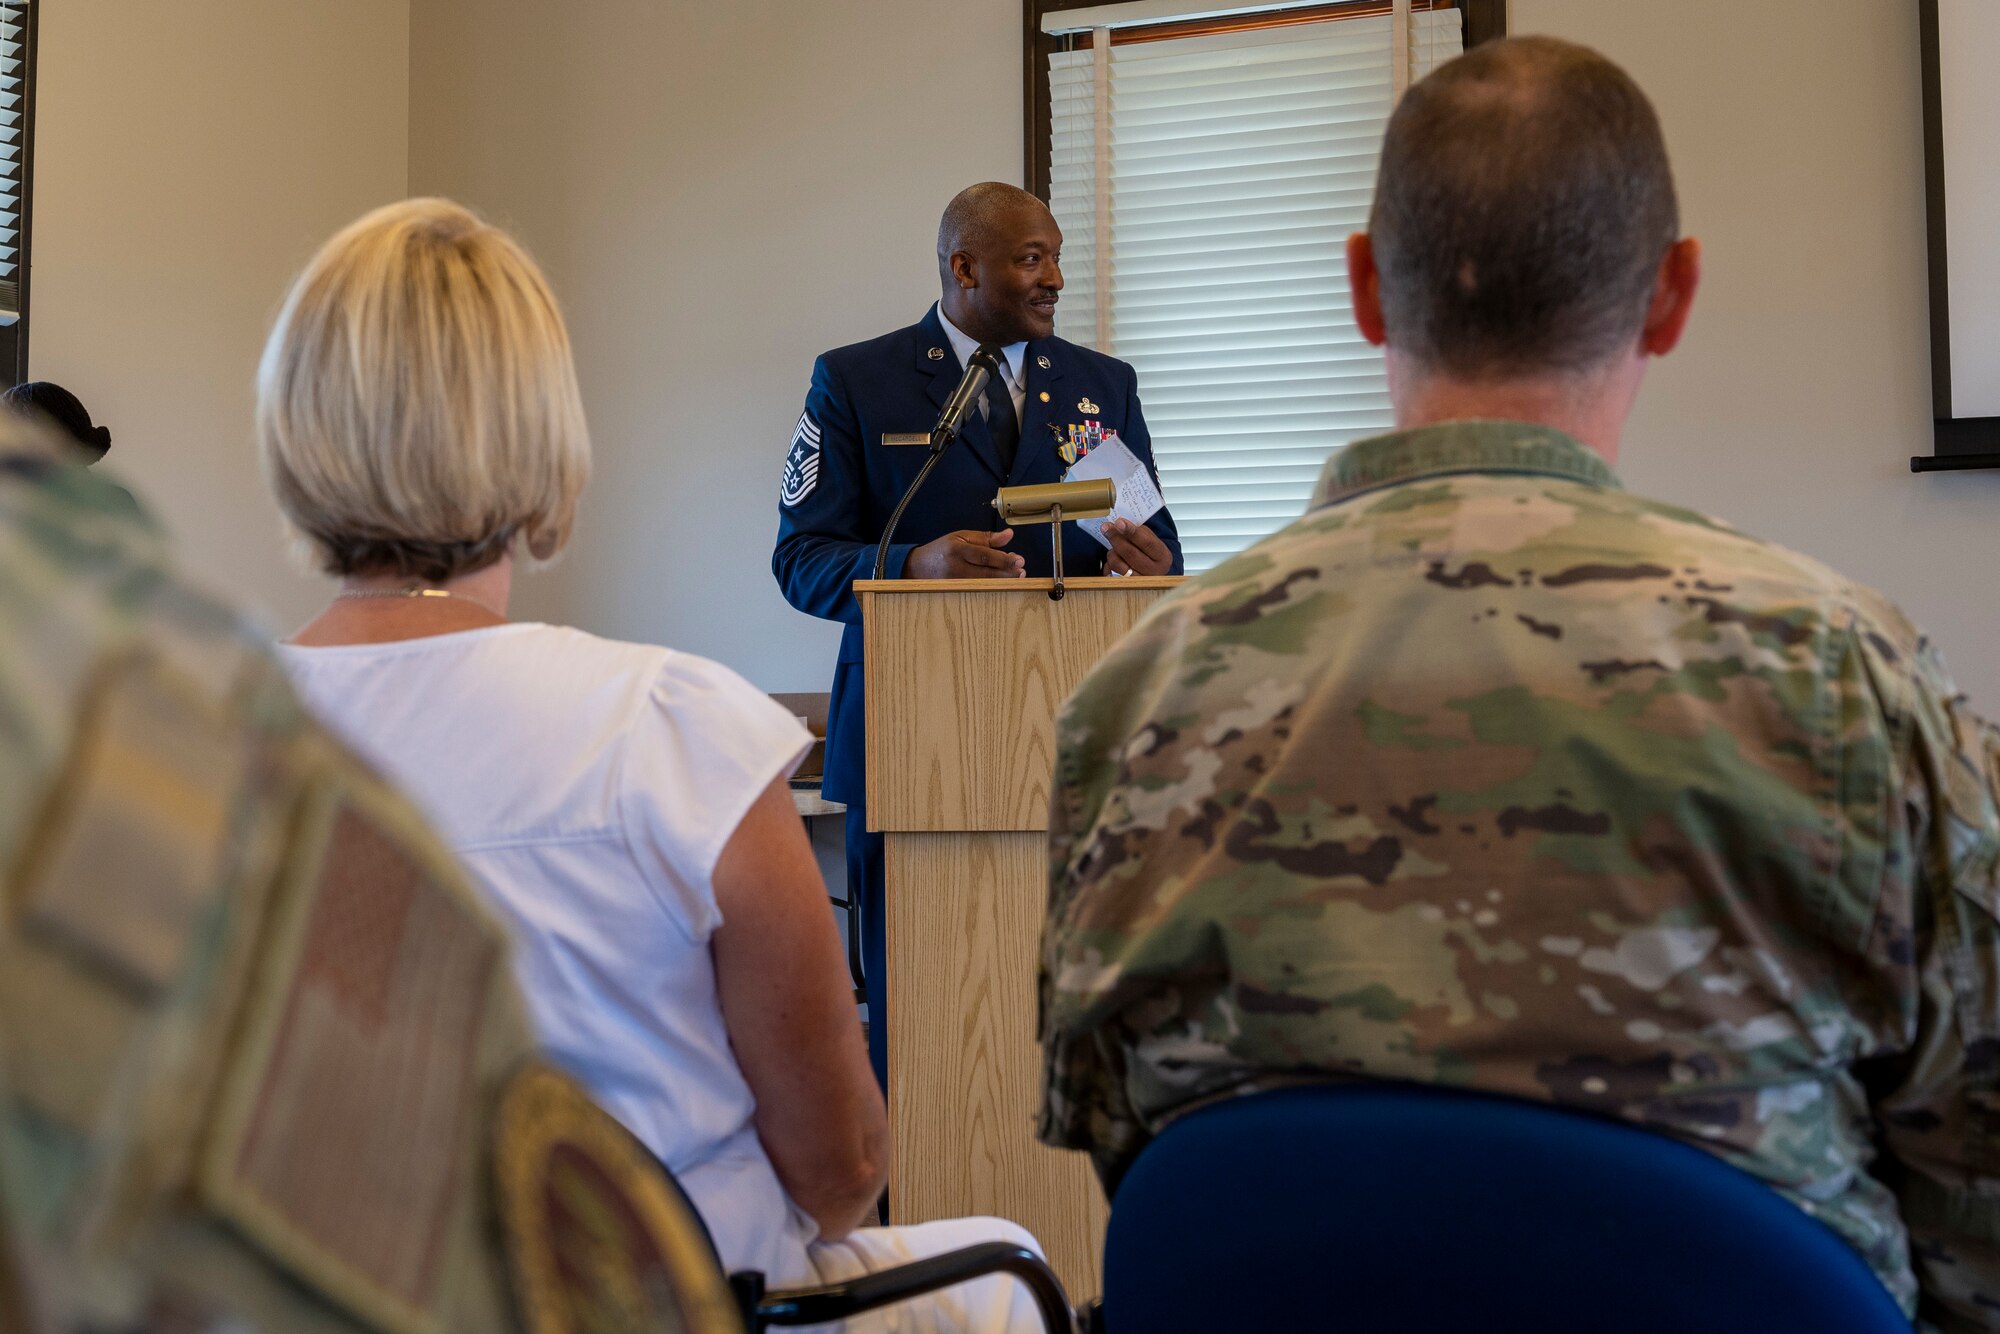 Chief Master Sgt. LeRoy E. McCardell Jr., 131st Bomb Wing command chief master sergeant, addresses the audience during his retirement ceremony, June 25, 2022, at Jefferson Barracks Air National Guard Base, St. Louis, Missouri. McCardell served for 34 years. (U.S. Air National Guard photo by Senior Airman Whitney Erhart)